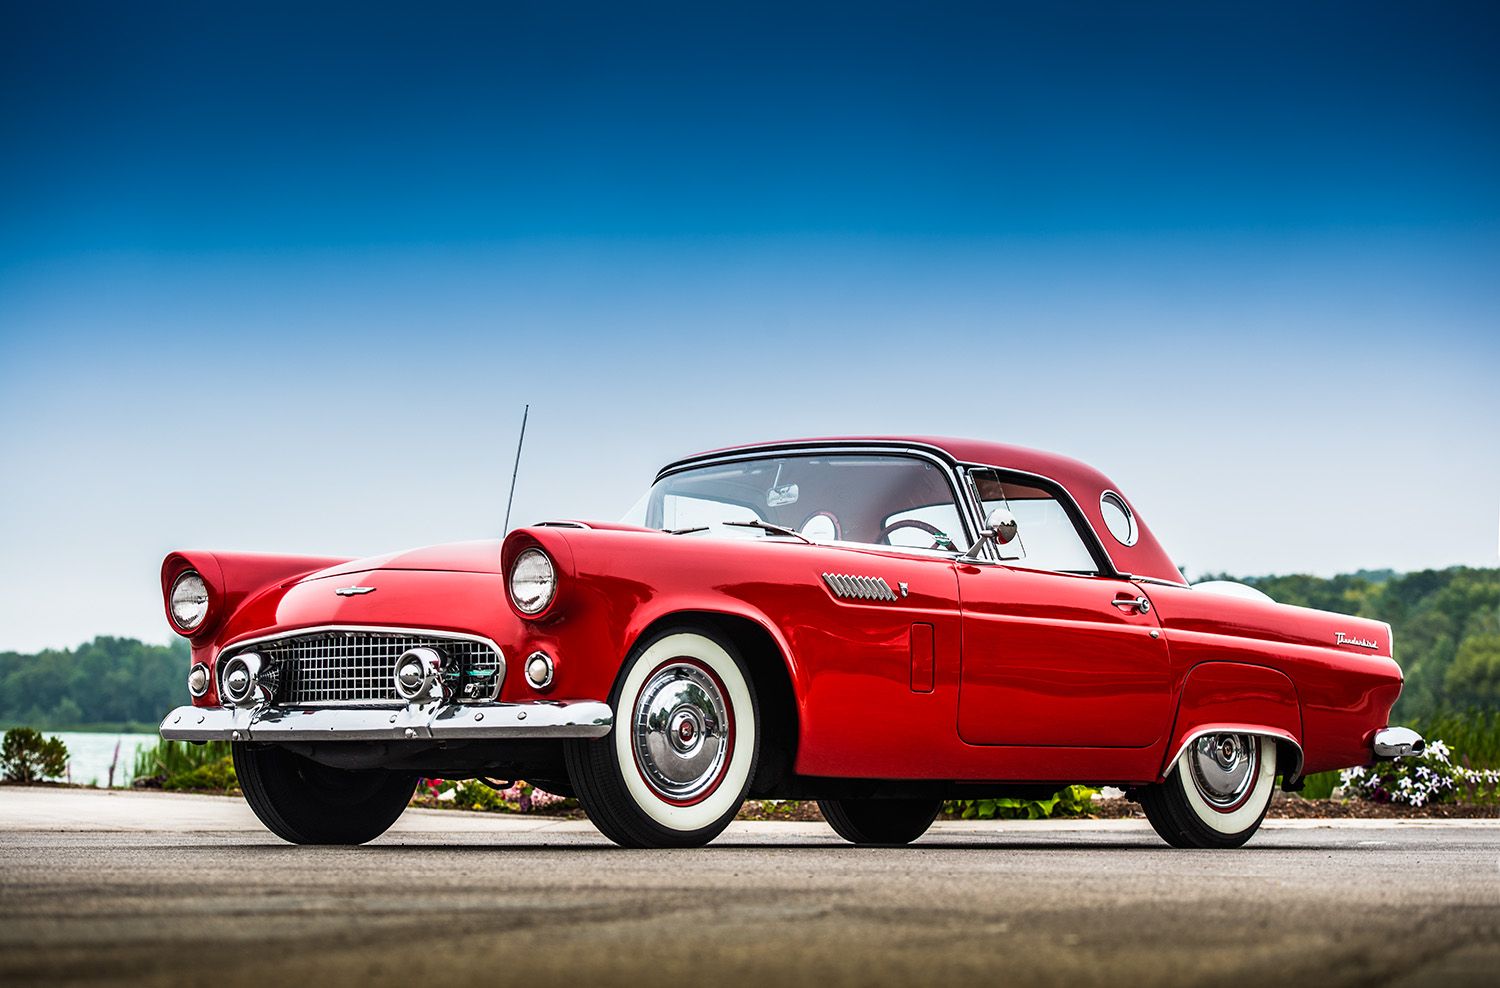 1955 Ford Thunderbird on the road